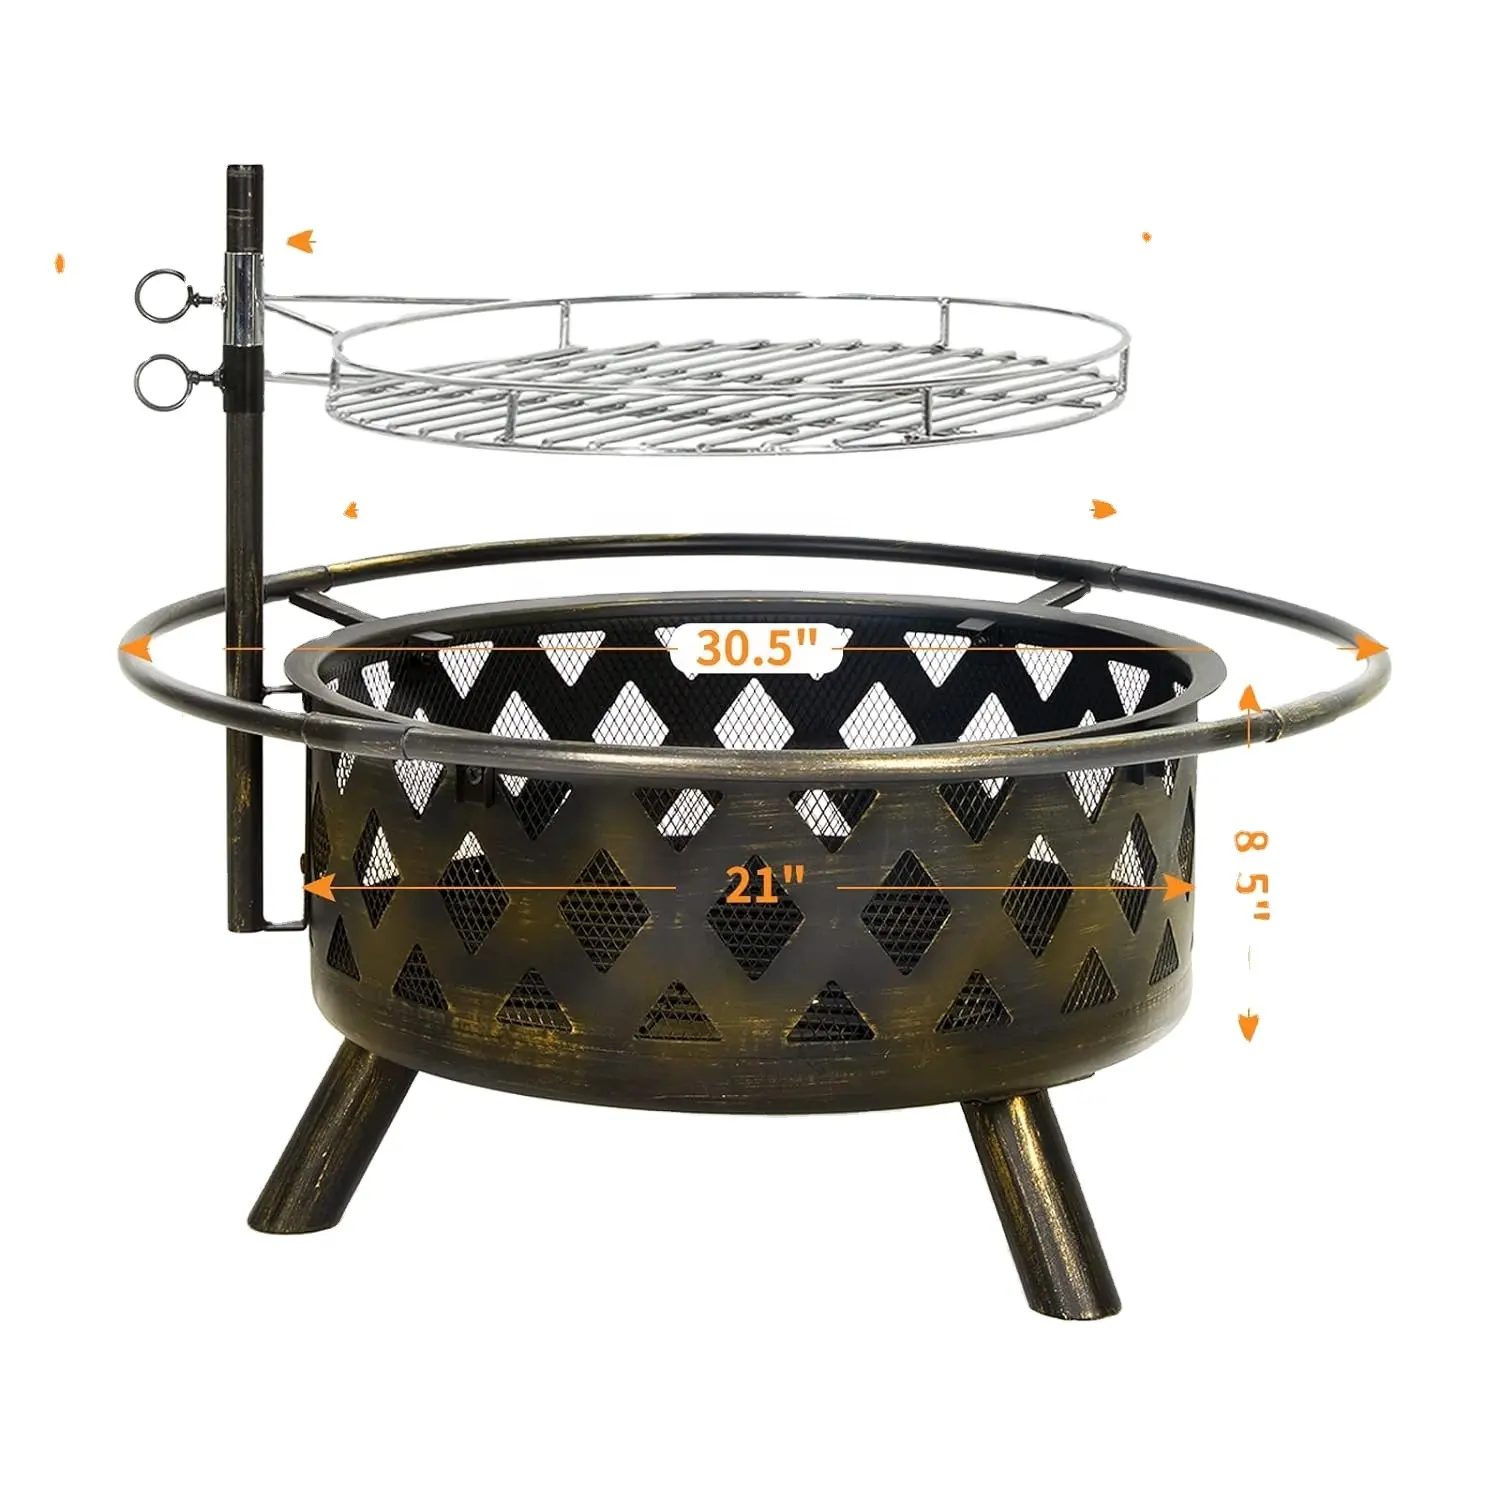 Large Round Metal Cast Iron fire pits Heated Stove Picnic wood burning fire pit outdoor Barbecue Bonfire Pot camping Fire Pit